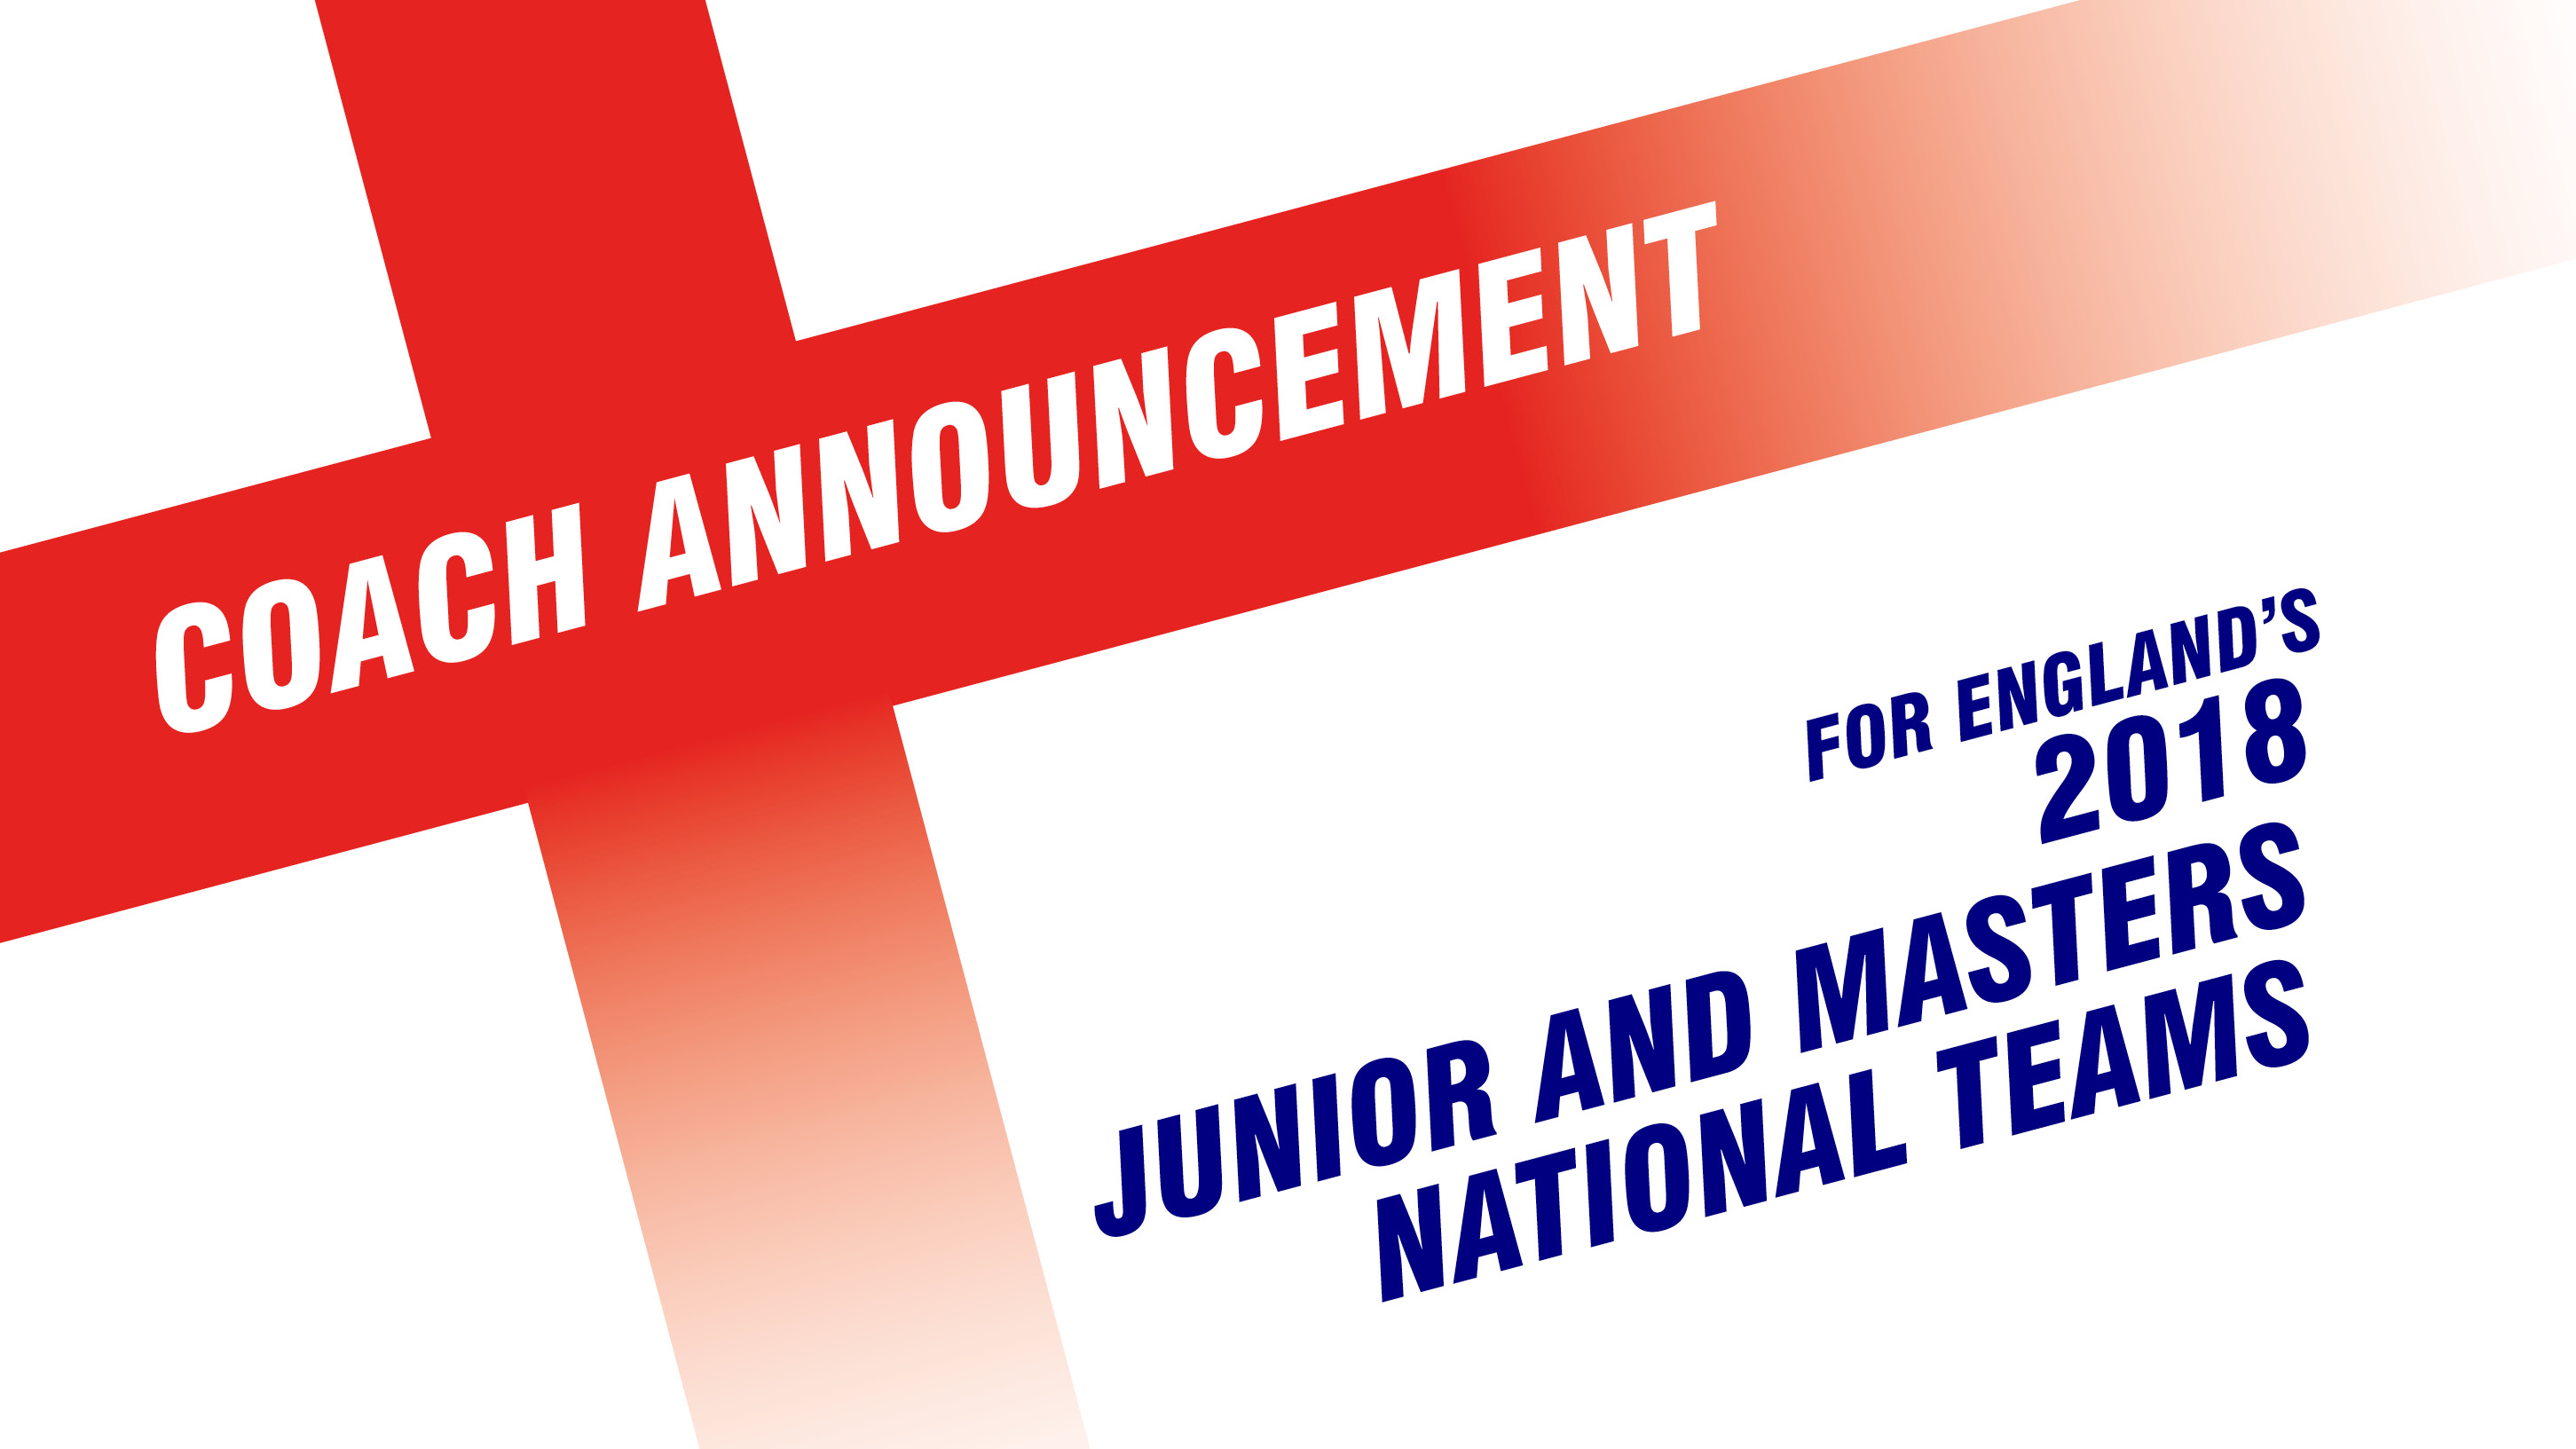 England Junior and Masters coaches announced